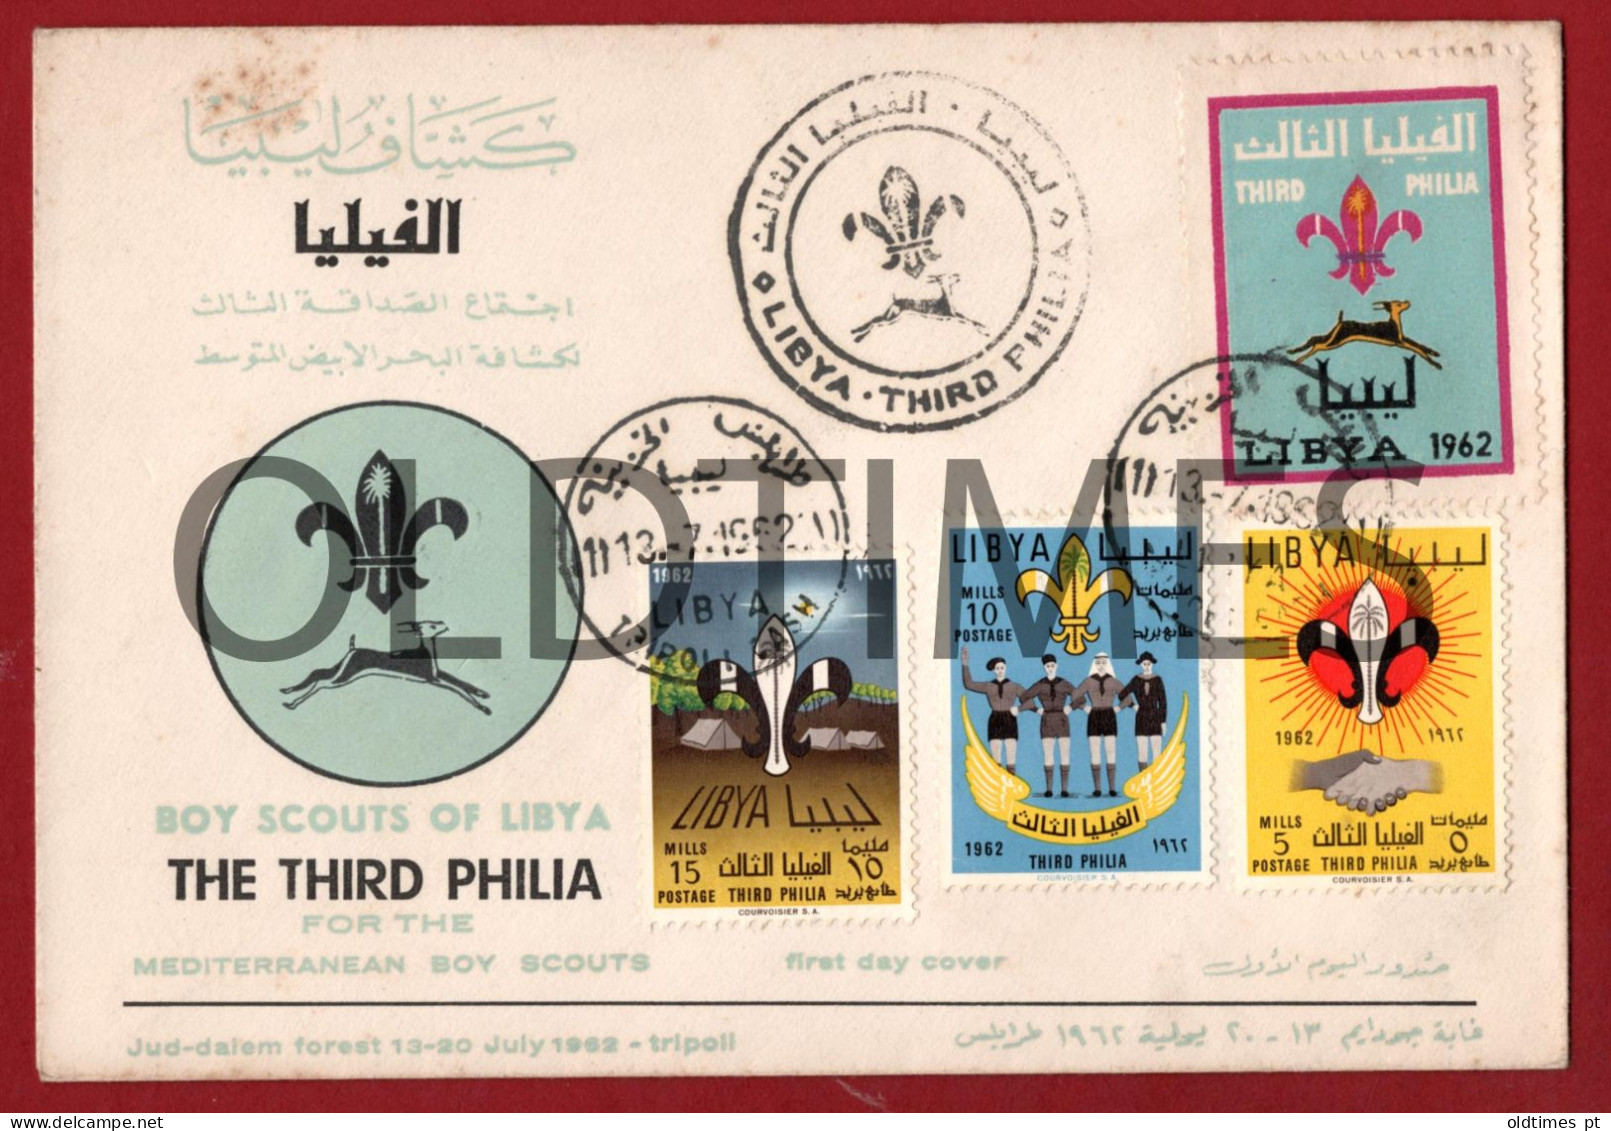 LIBYA - BOY SCOUTS OF LIBYA - THE THIRD PHILIA FOR THE MEDITERRANEAN - FIRST DAY COVER - 1962 ENVELOPE - Scoutismo